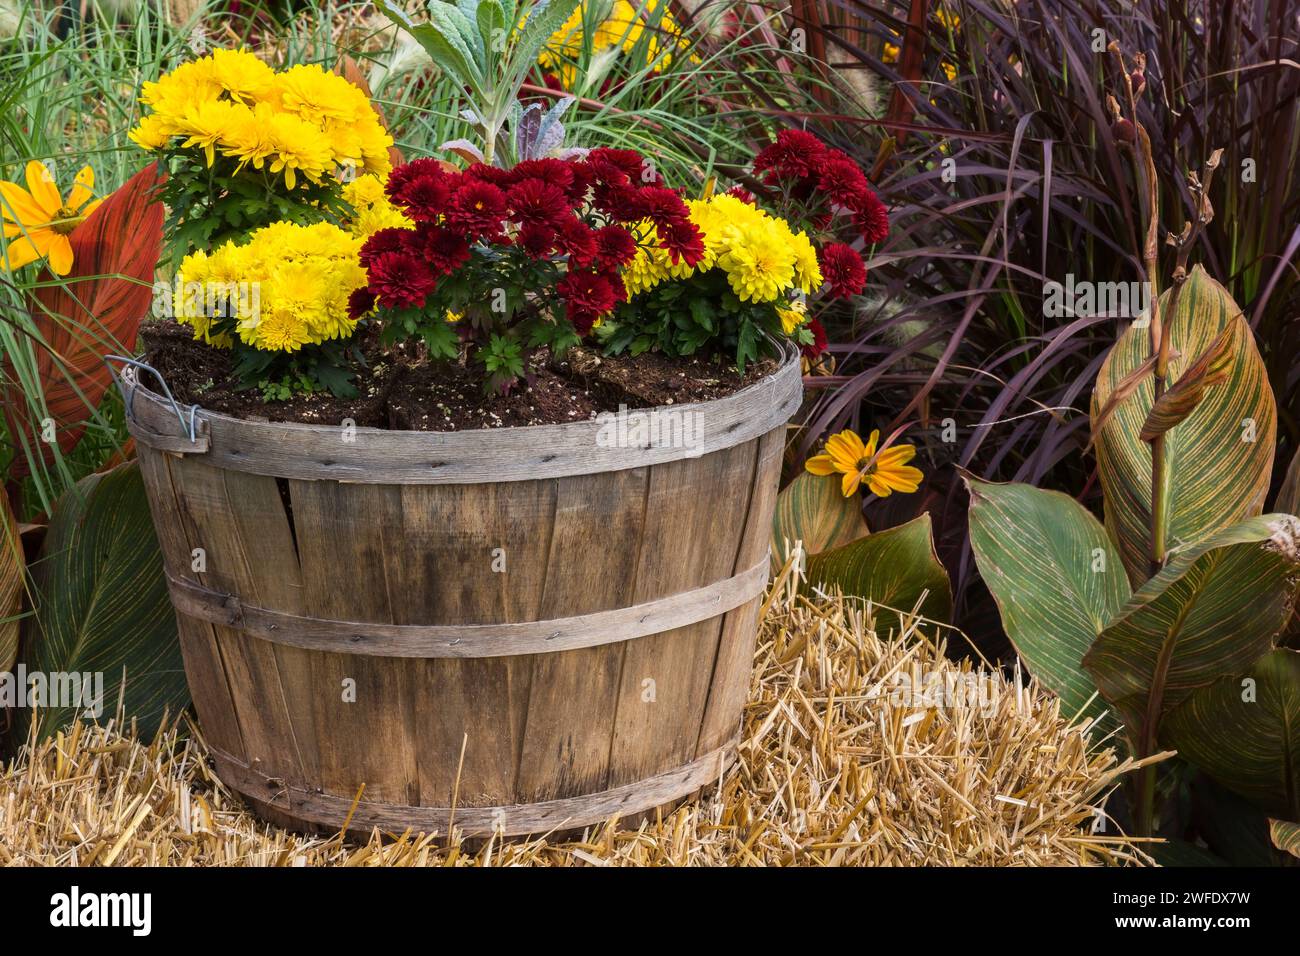 Crimson red and yellow Chrysanthemum flowers growing in wooden basket in autumn. Stock Photo